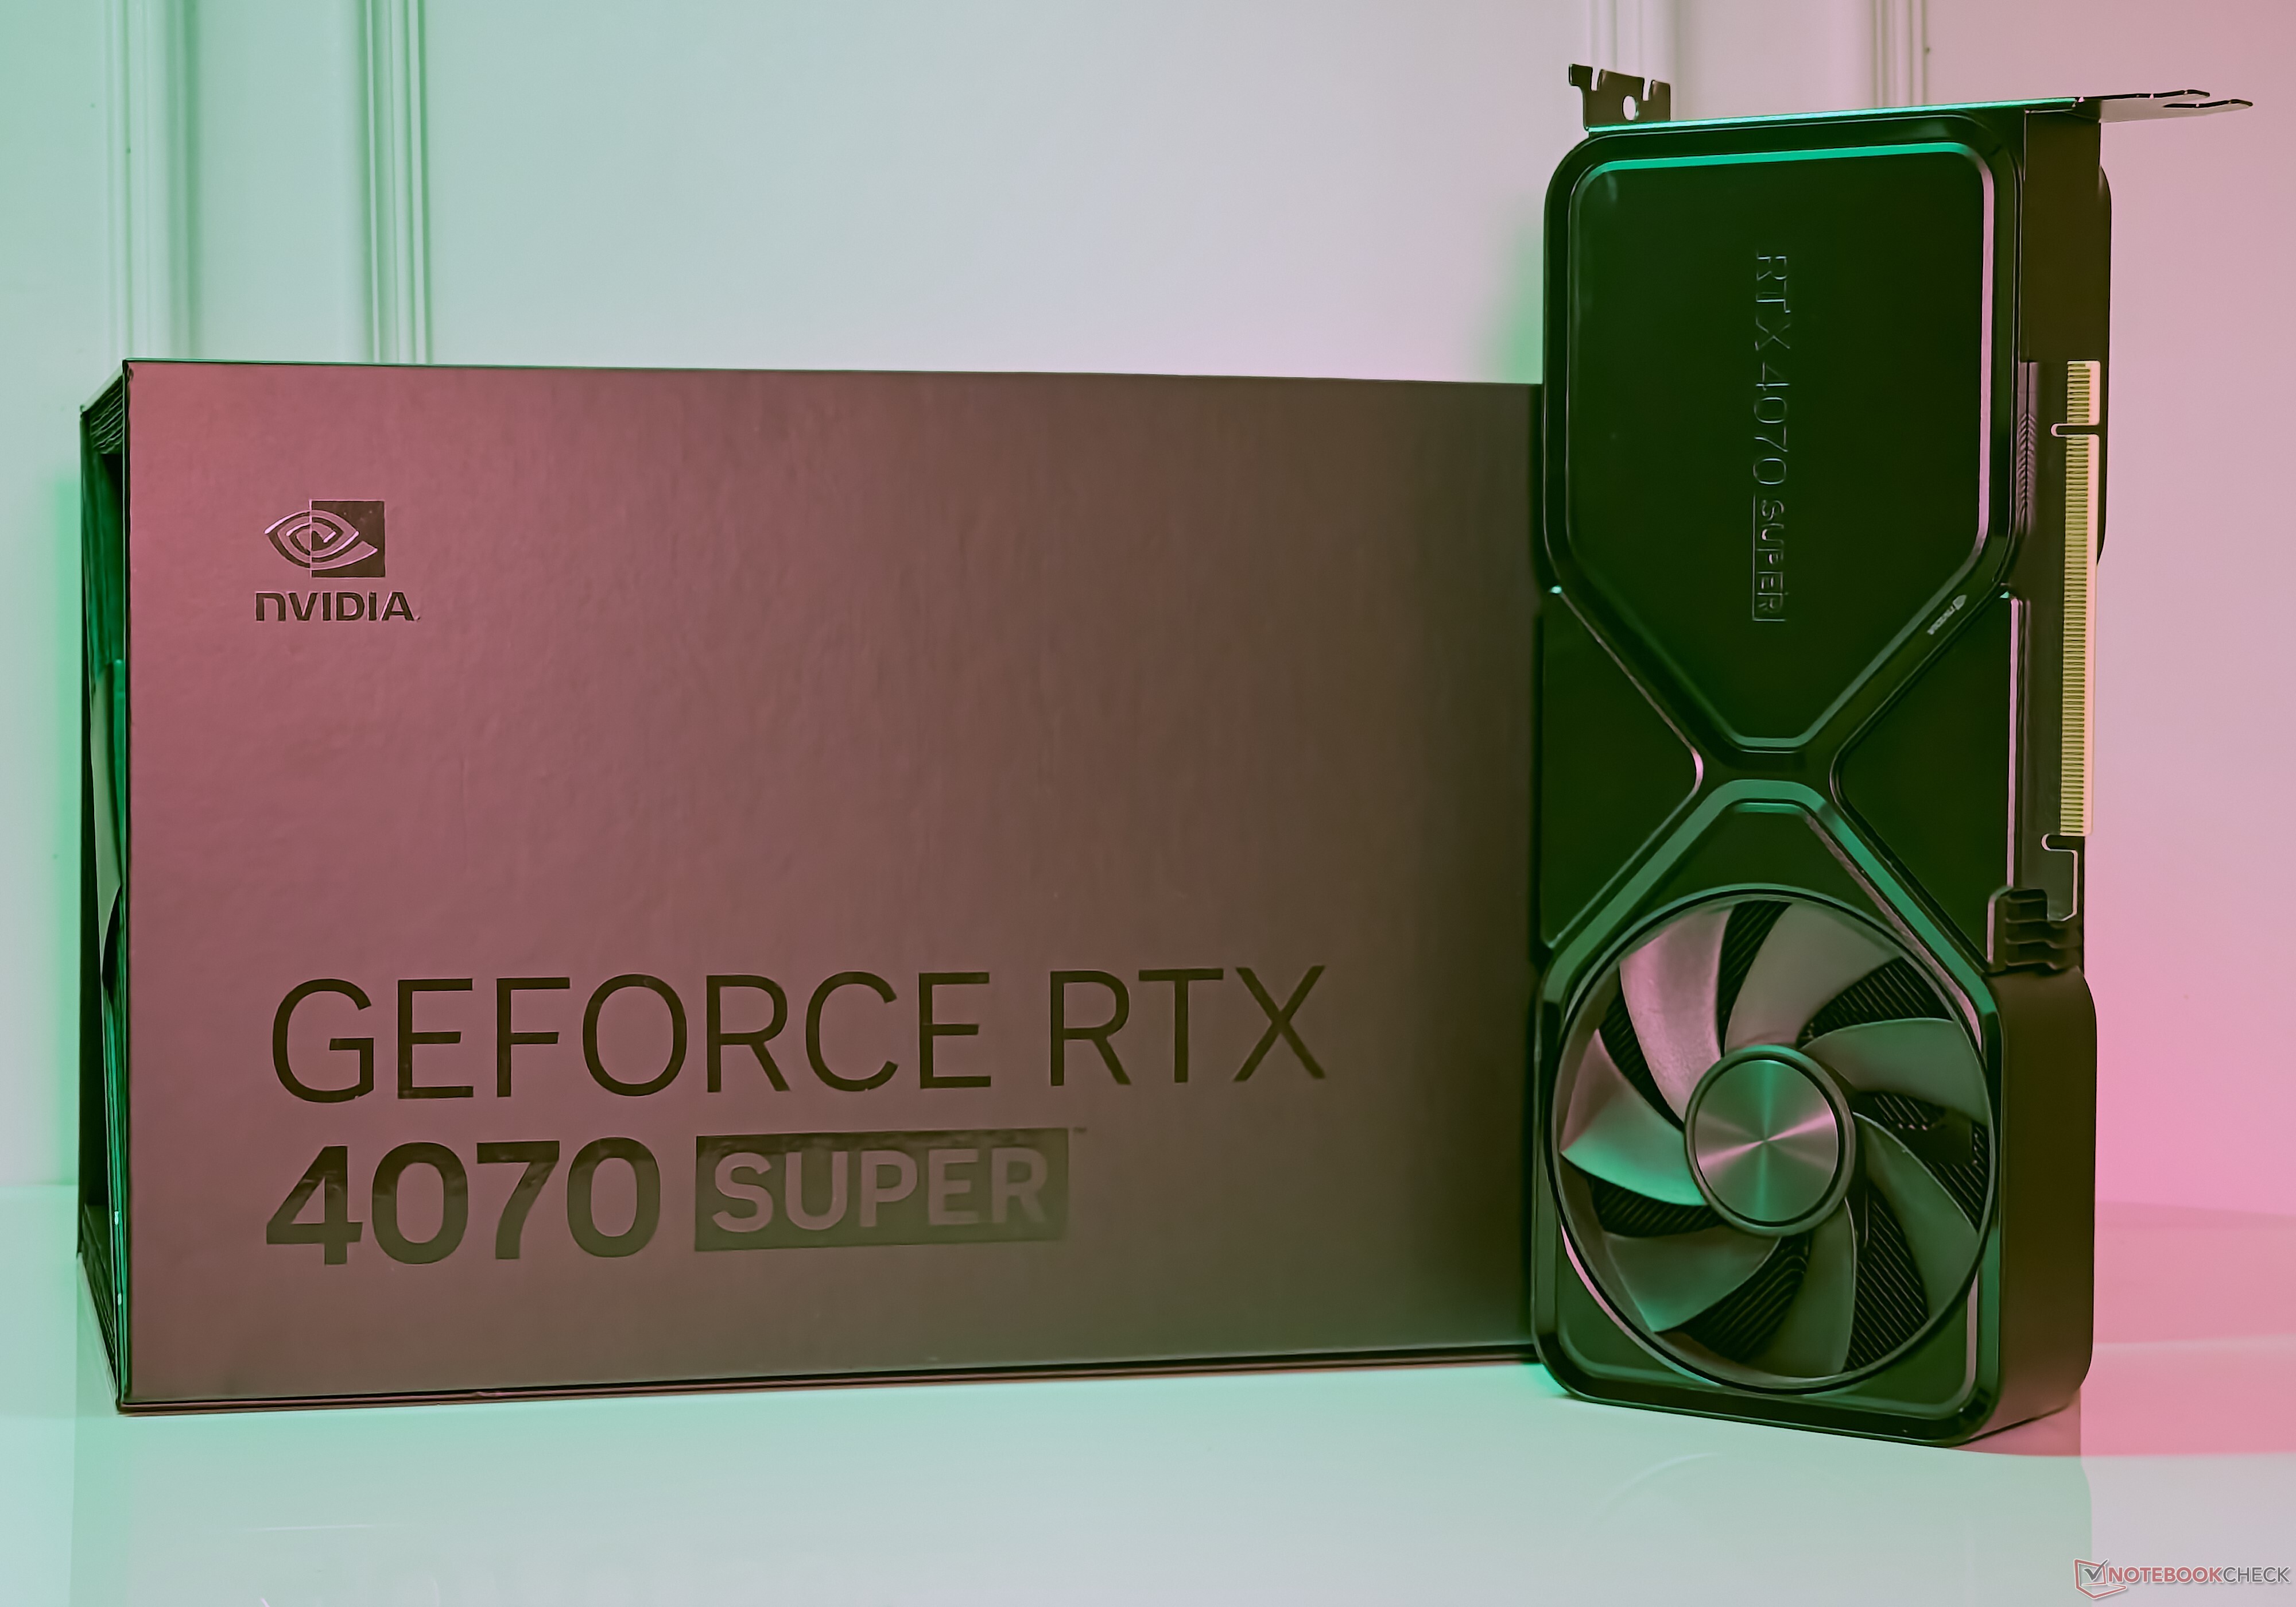 Nvidia GeForce RTX 4070 Super Founders Edition incelemede